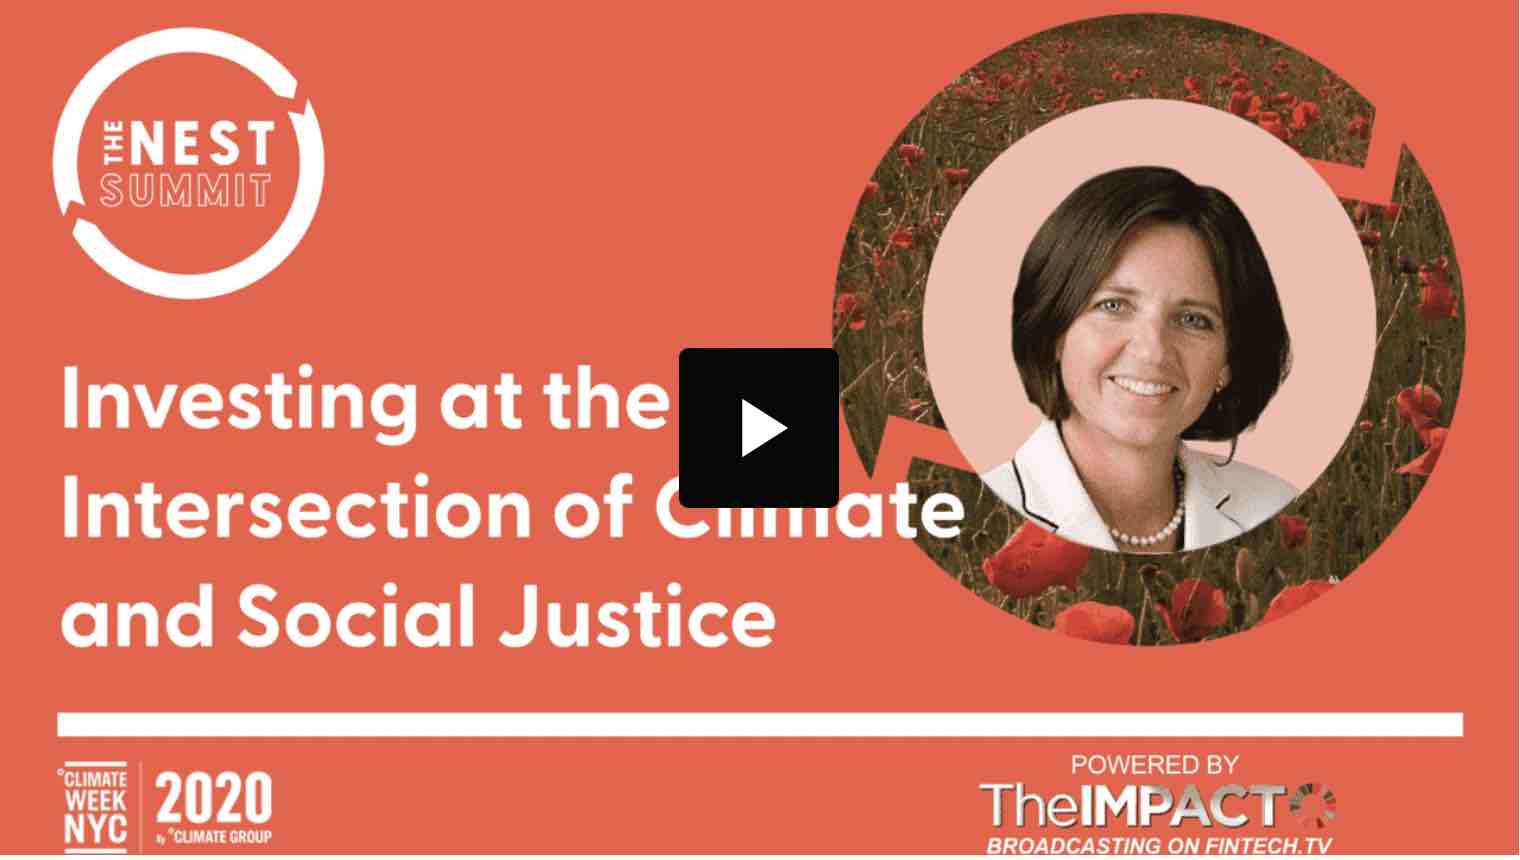 Investing at the Intersection of Climate and Social Justice